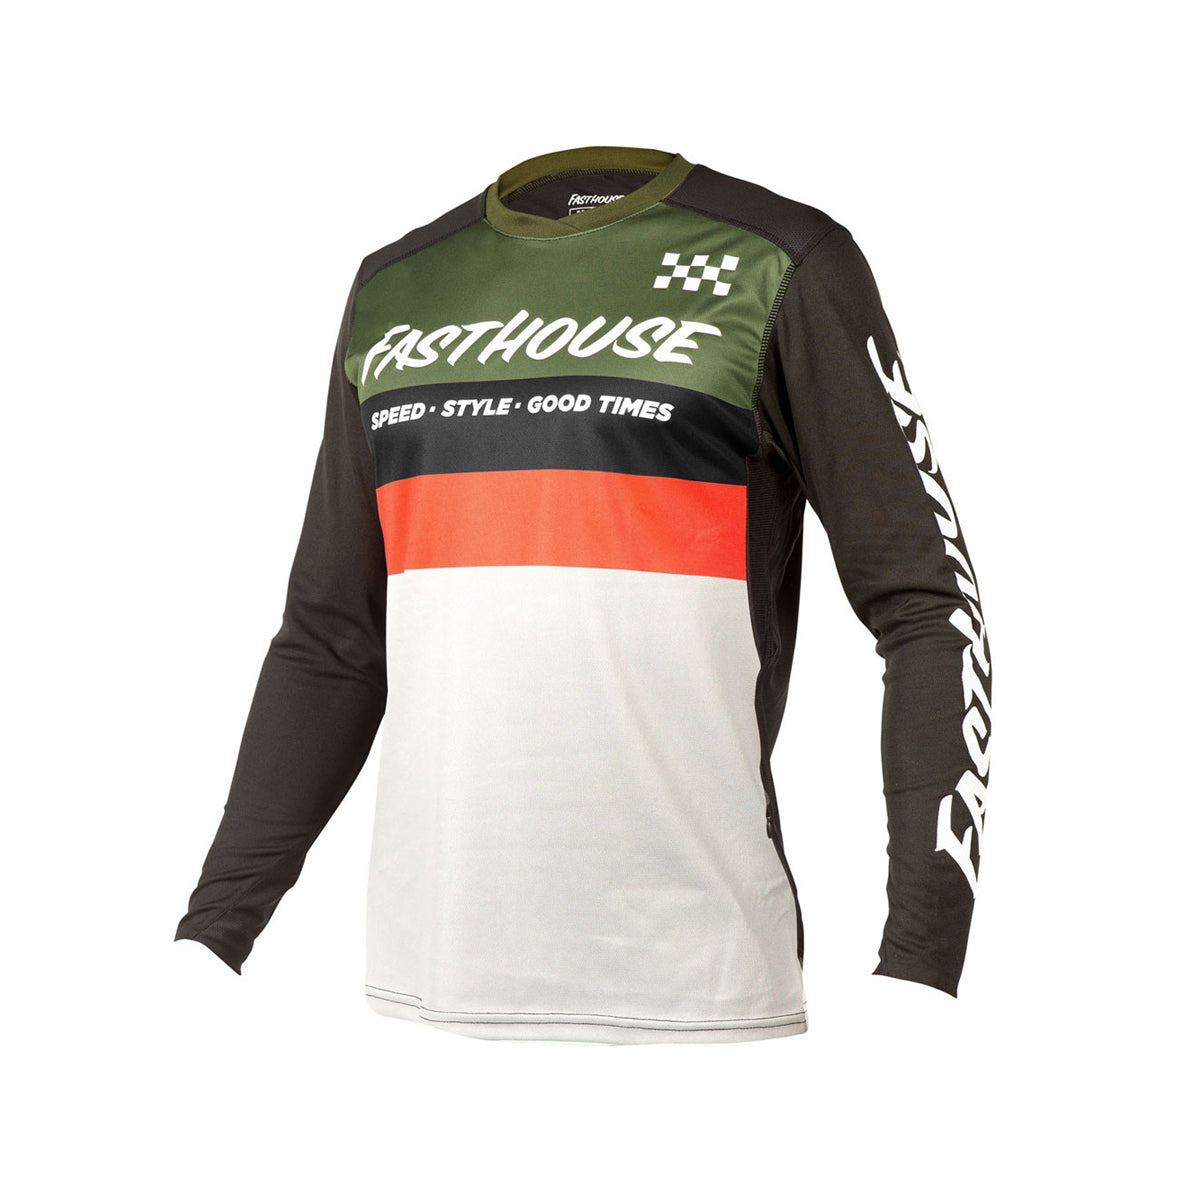 Alloy Kilo LS Youth Jersey - Olive/White